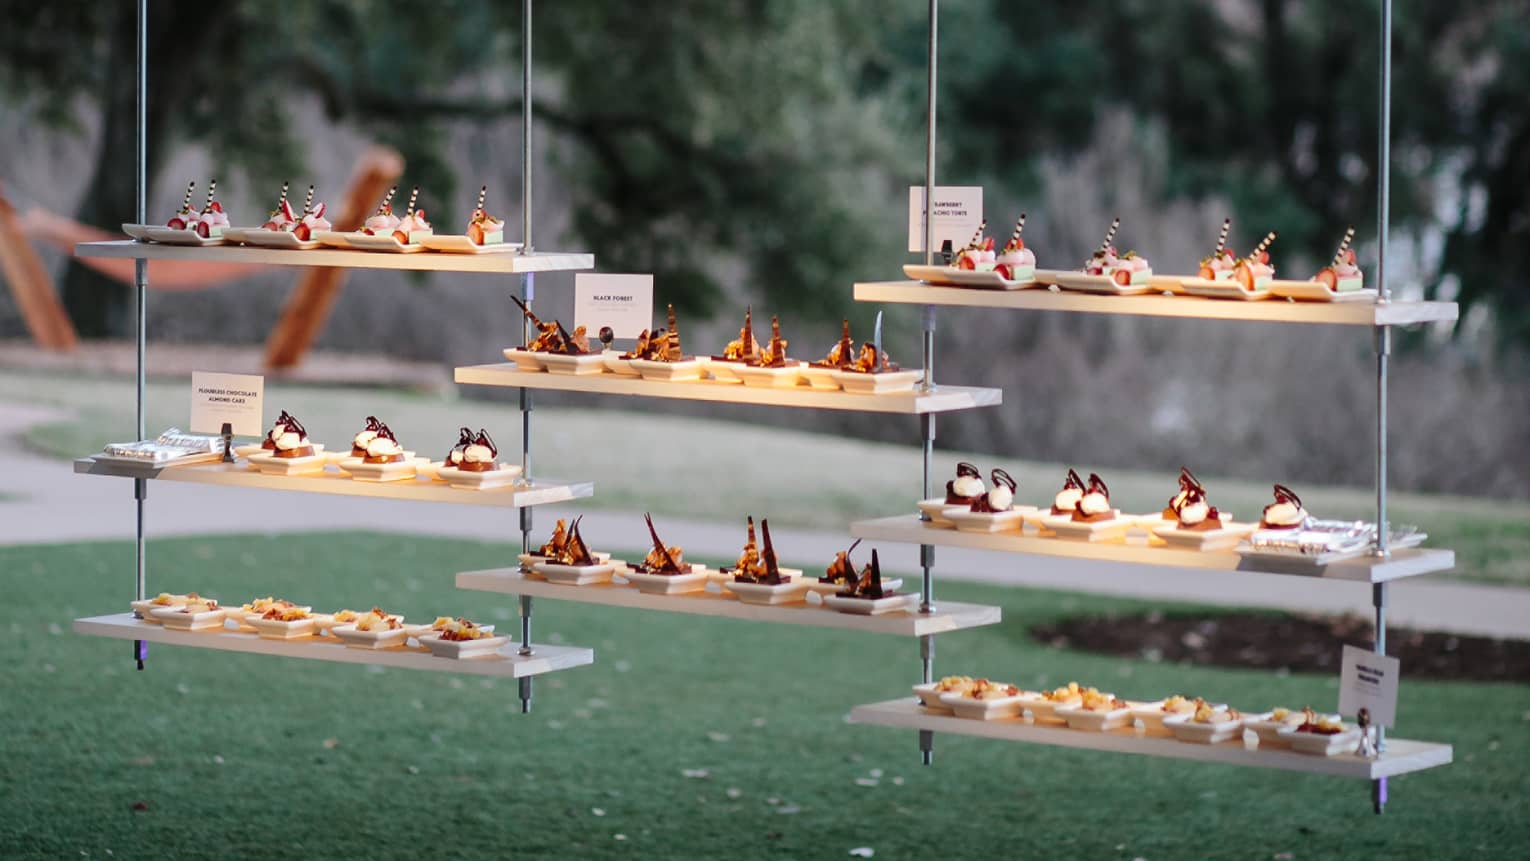 Trays holding hors d'oeuvres hang from trees in a courtyard 